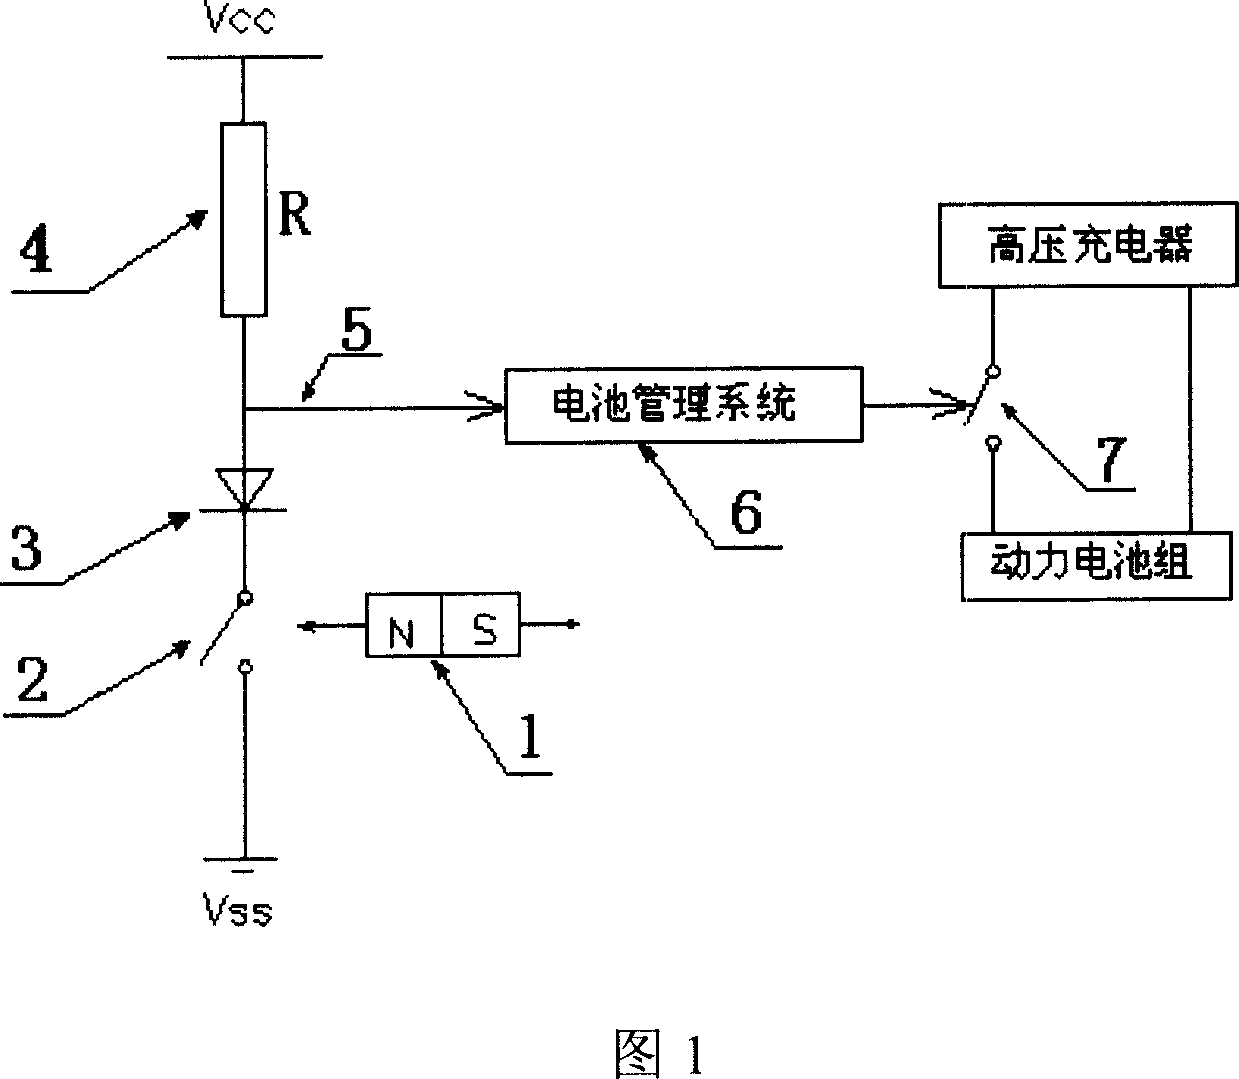 Controller for electric vehicle charging system